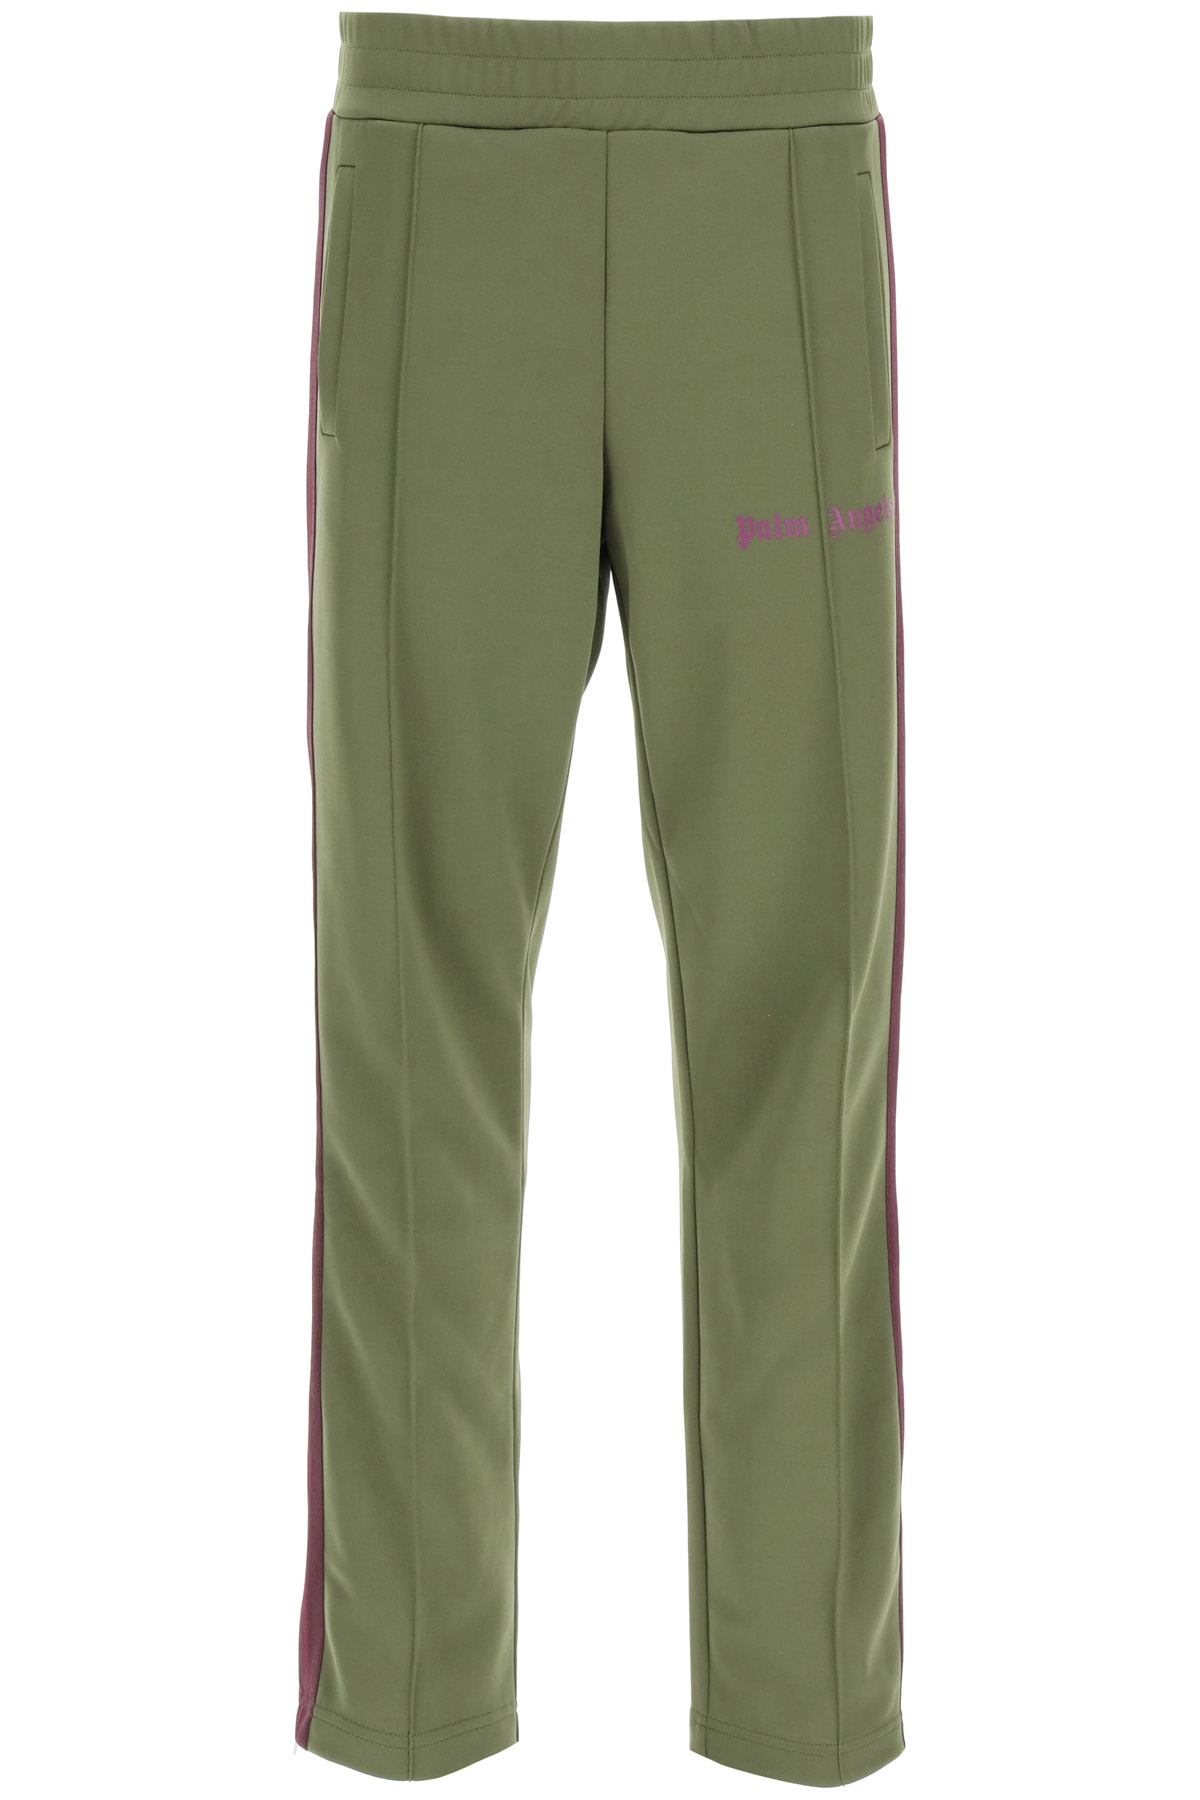 Palm Angels Pants In Military